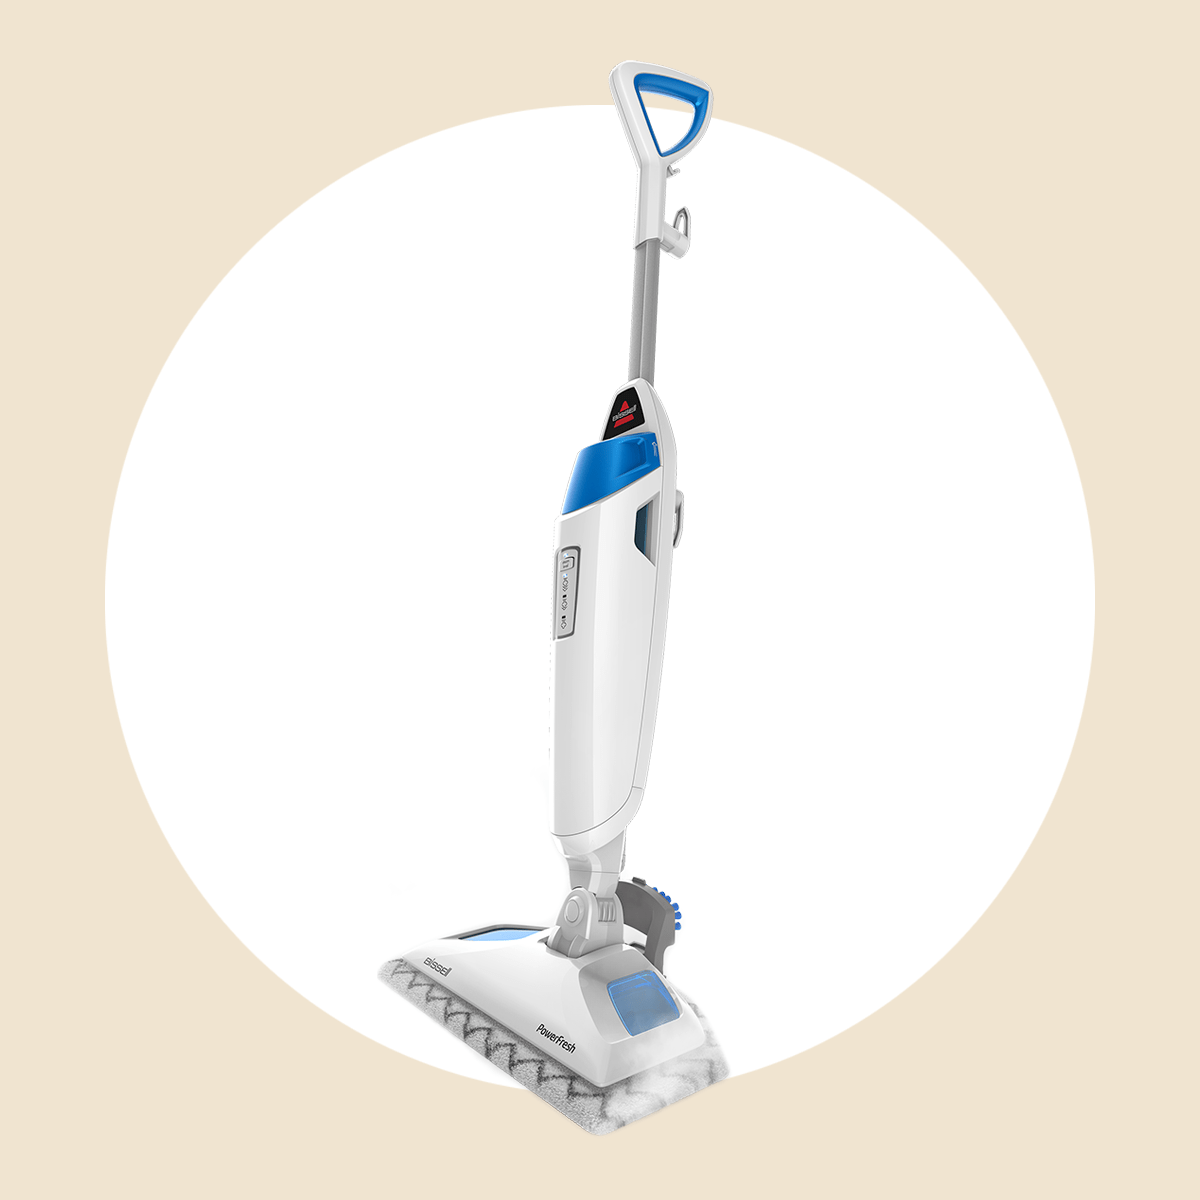 This Steam Mop That Works 'Wonders' on Grout Is on Sale at